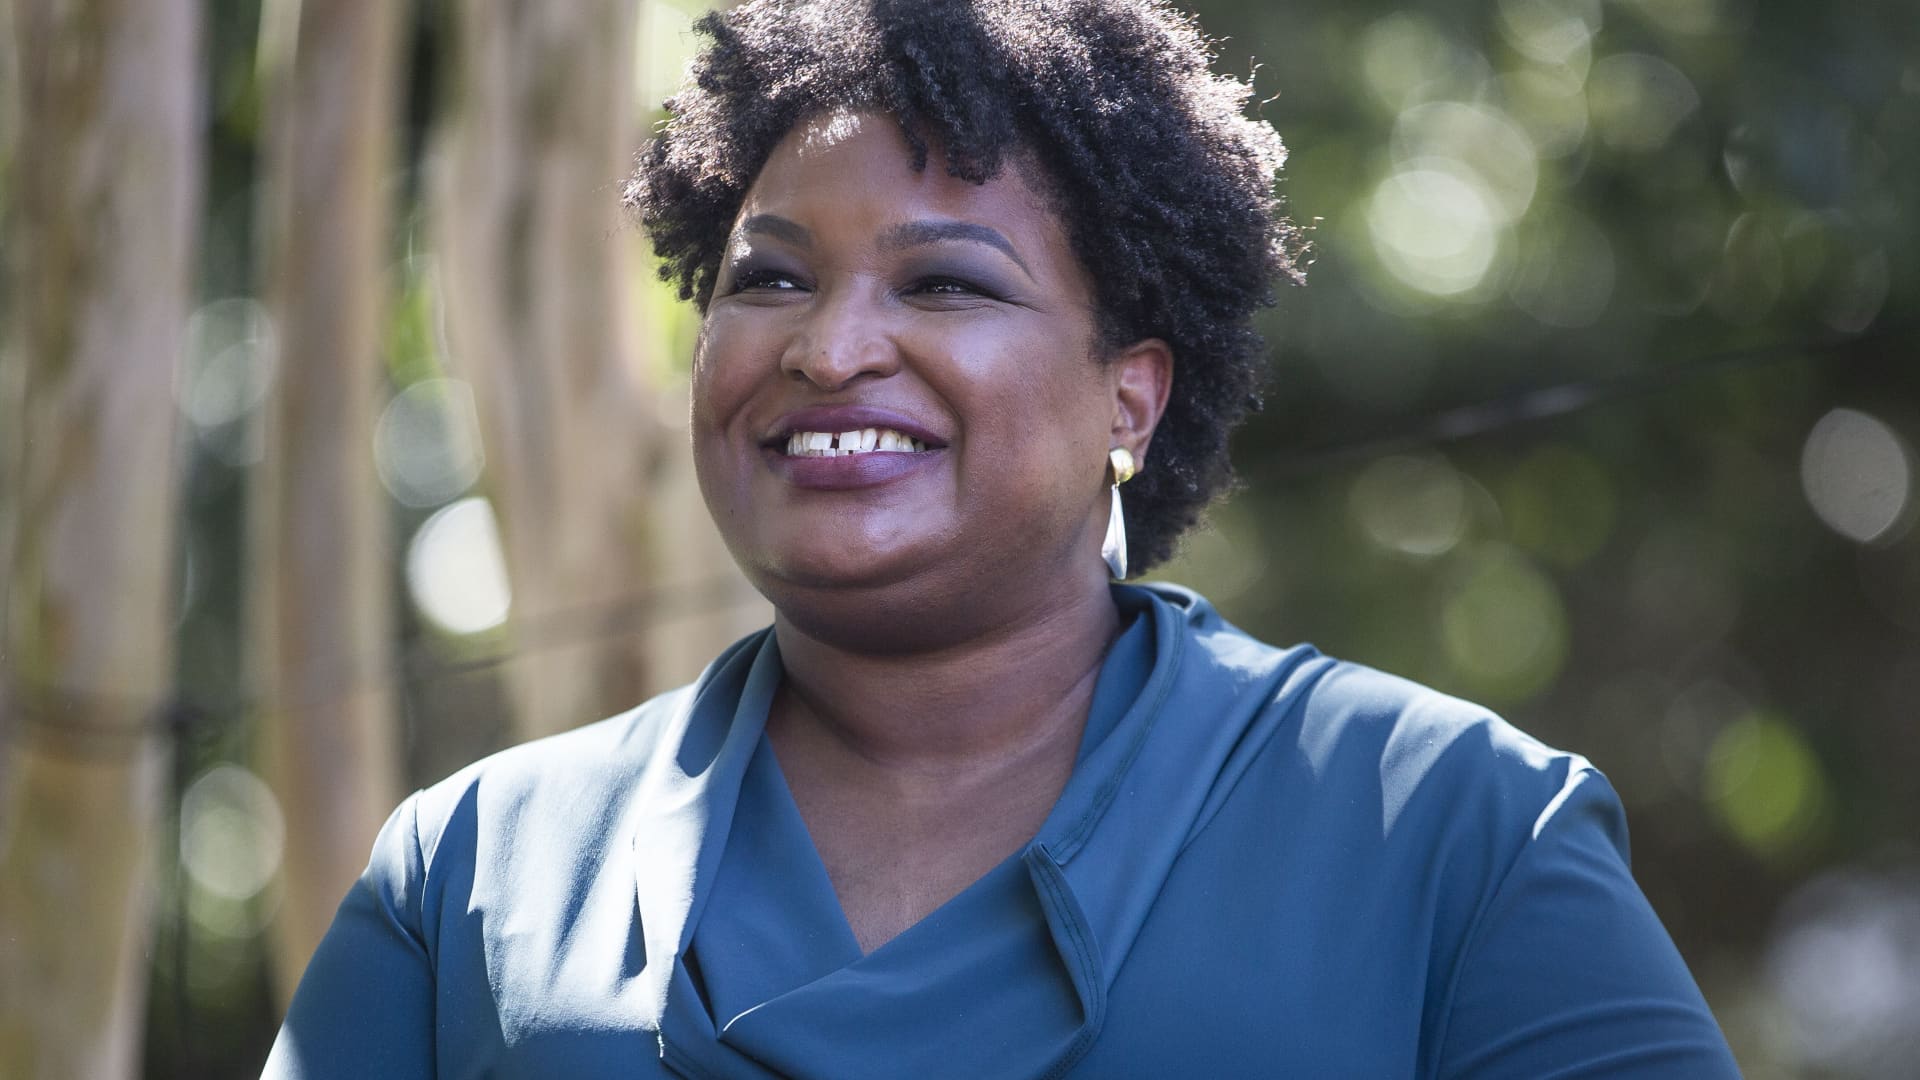 Stacey Abrams to new grads: 'Be fearless' is the dumbest advice I've ever heard'